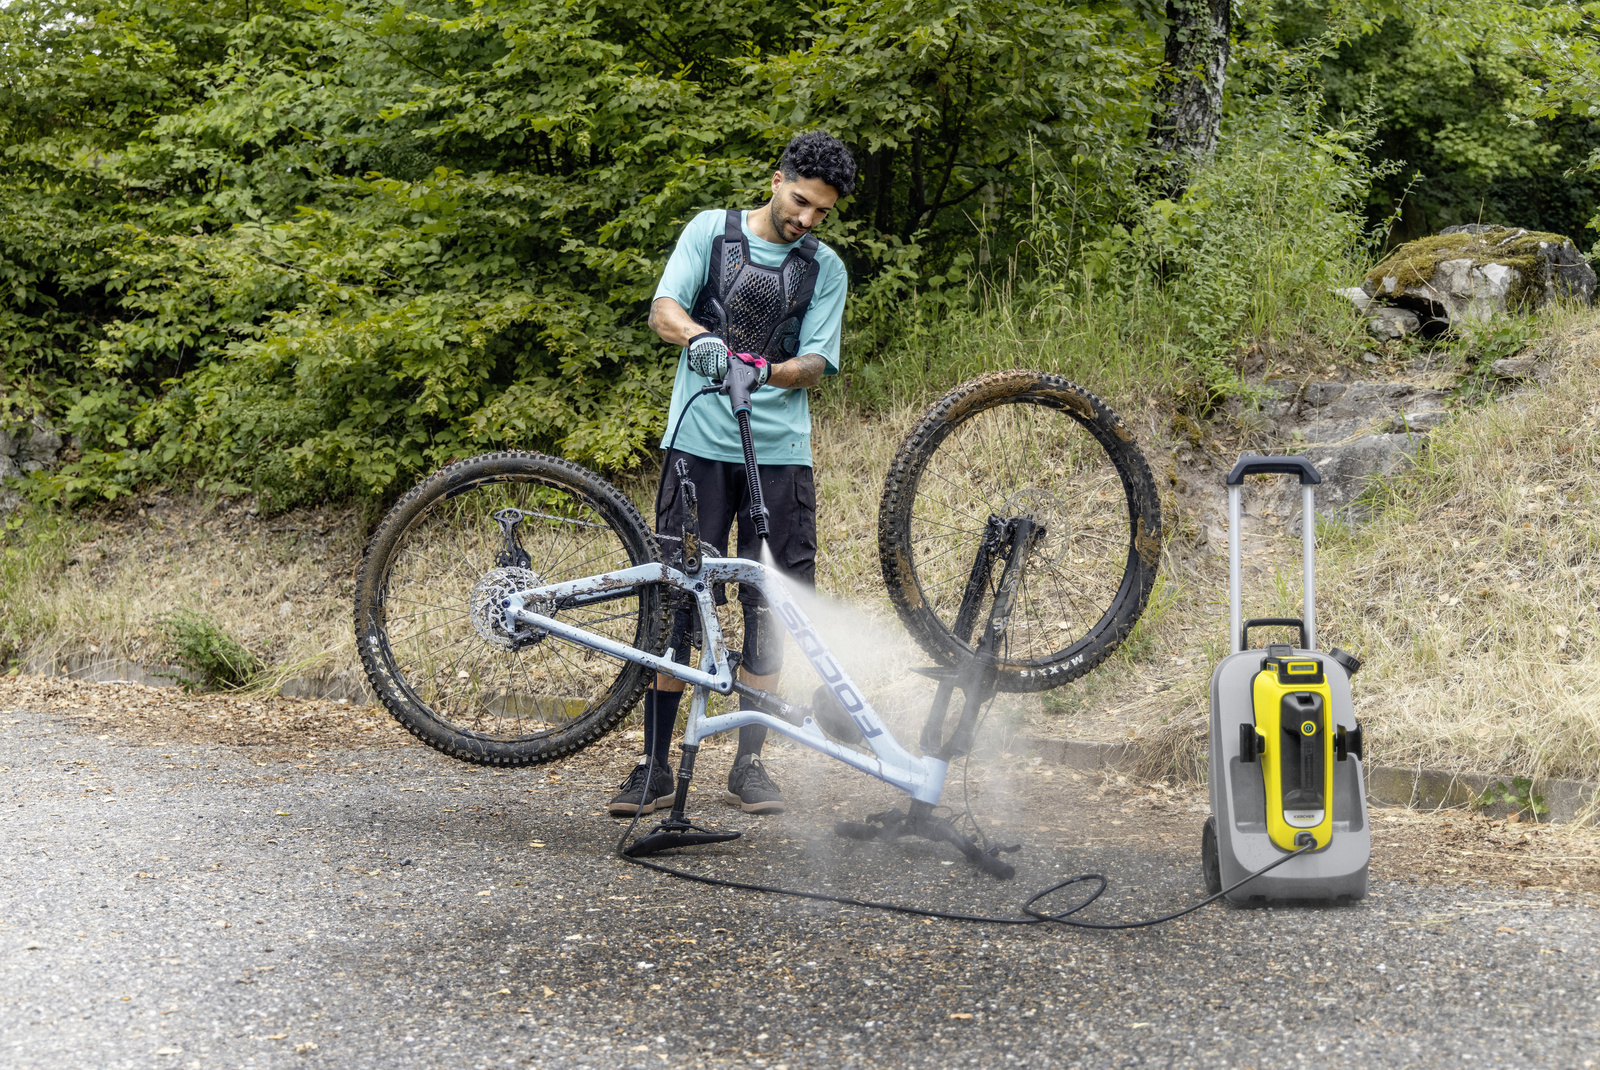 Mobile medium-pressure washer with 18 V battery from Kärcher